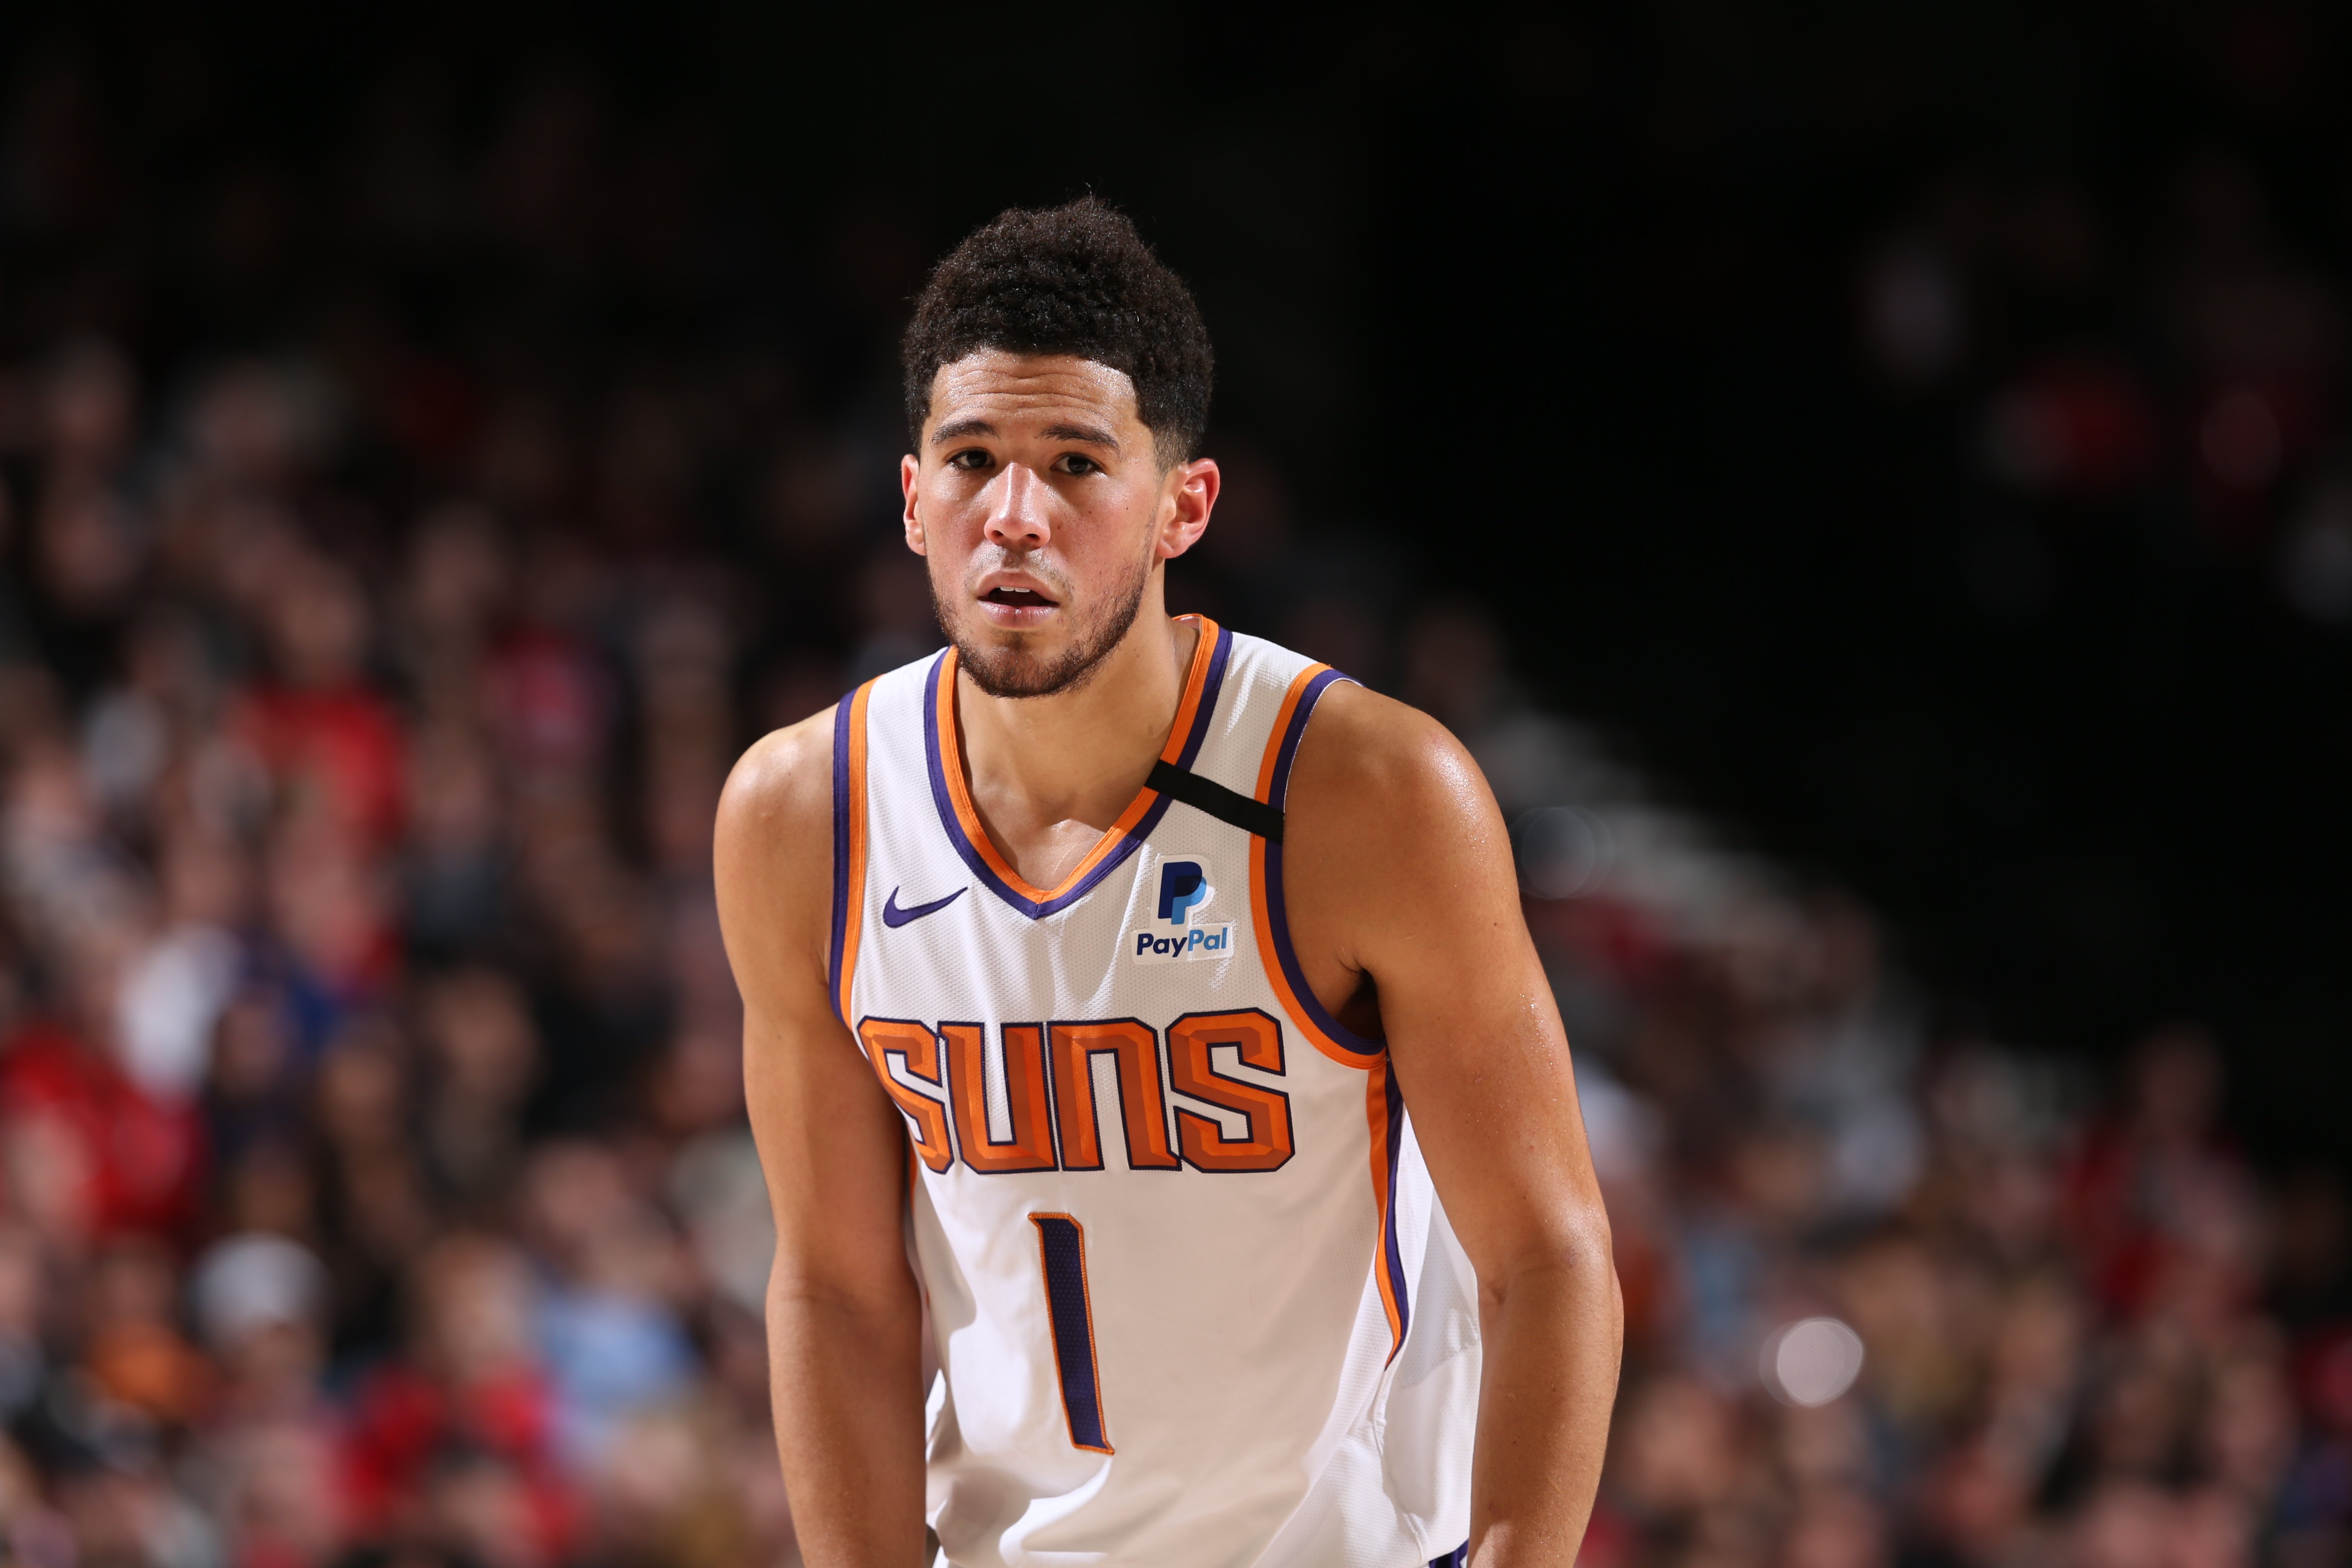 Devin Booker during a game on March 10 , 2020 at the Moda Center Arena | Photo: Getty Images